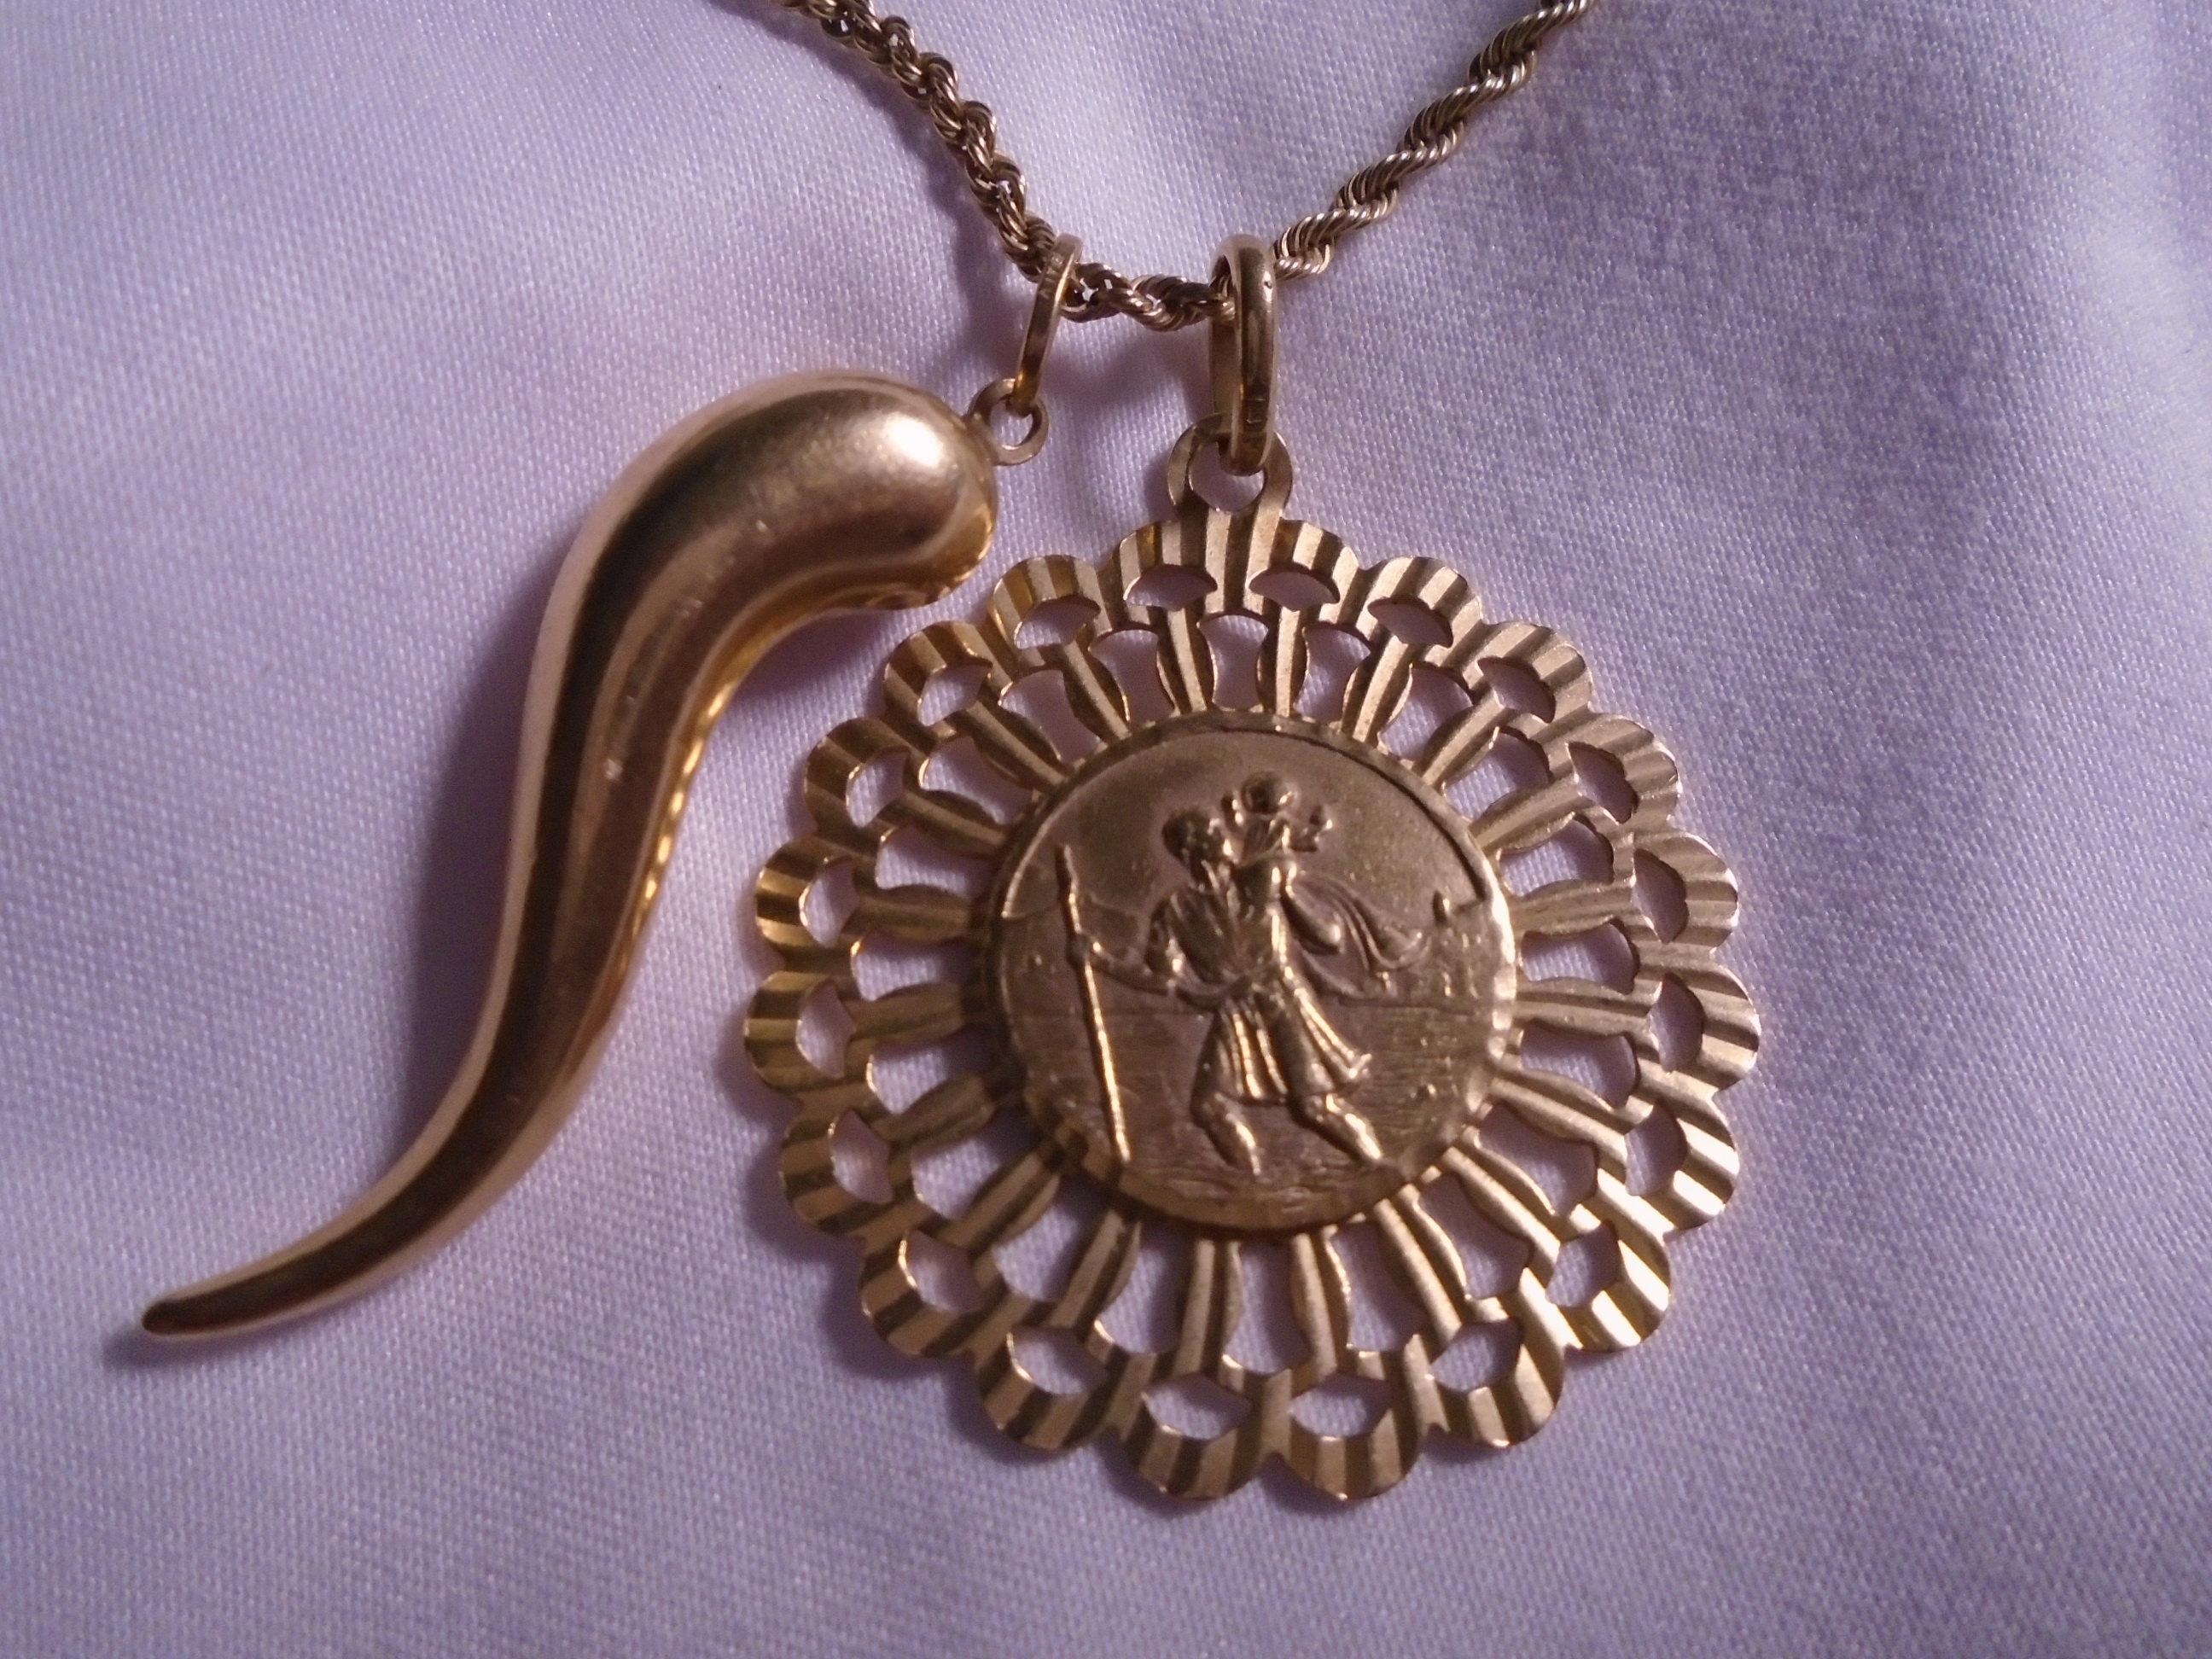 14kt yellow gold necklace with chili pepper pendant and coin pendant.